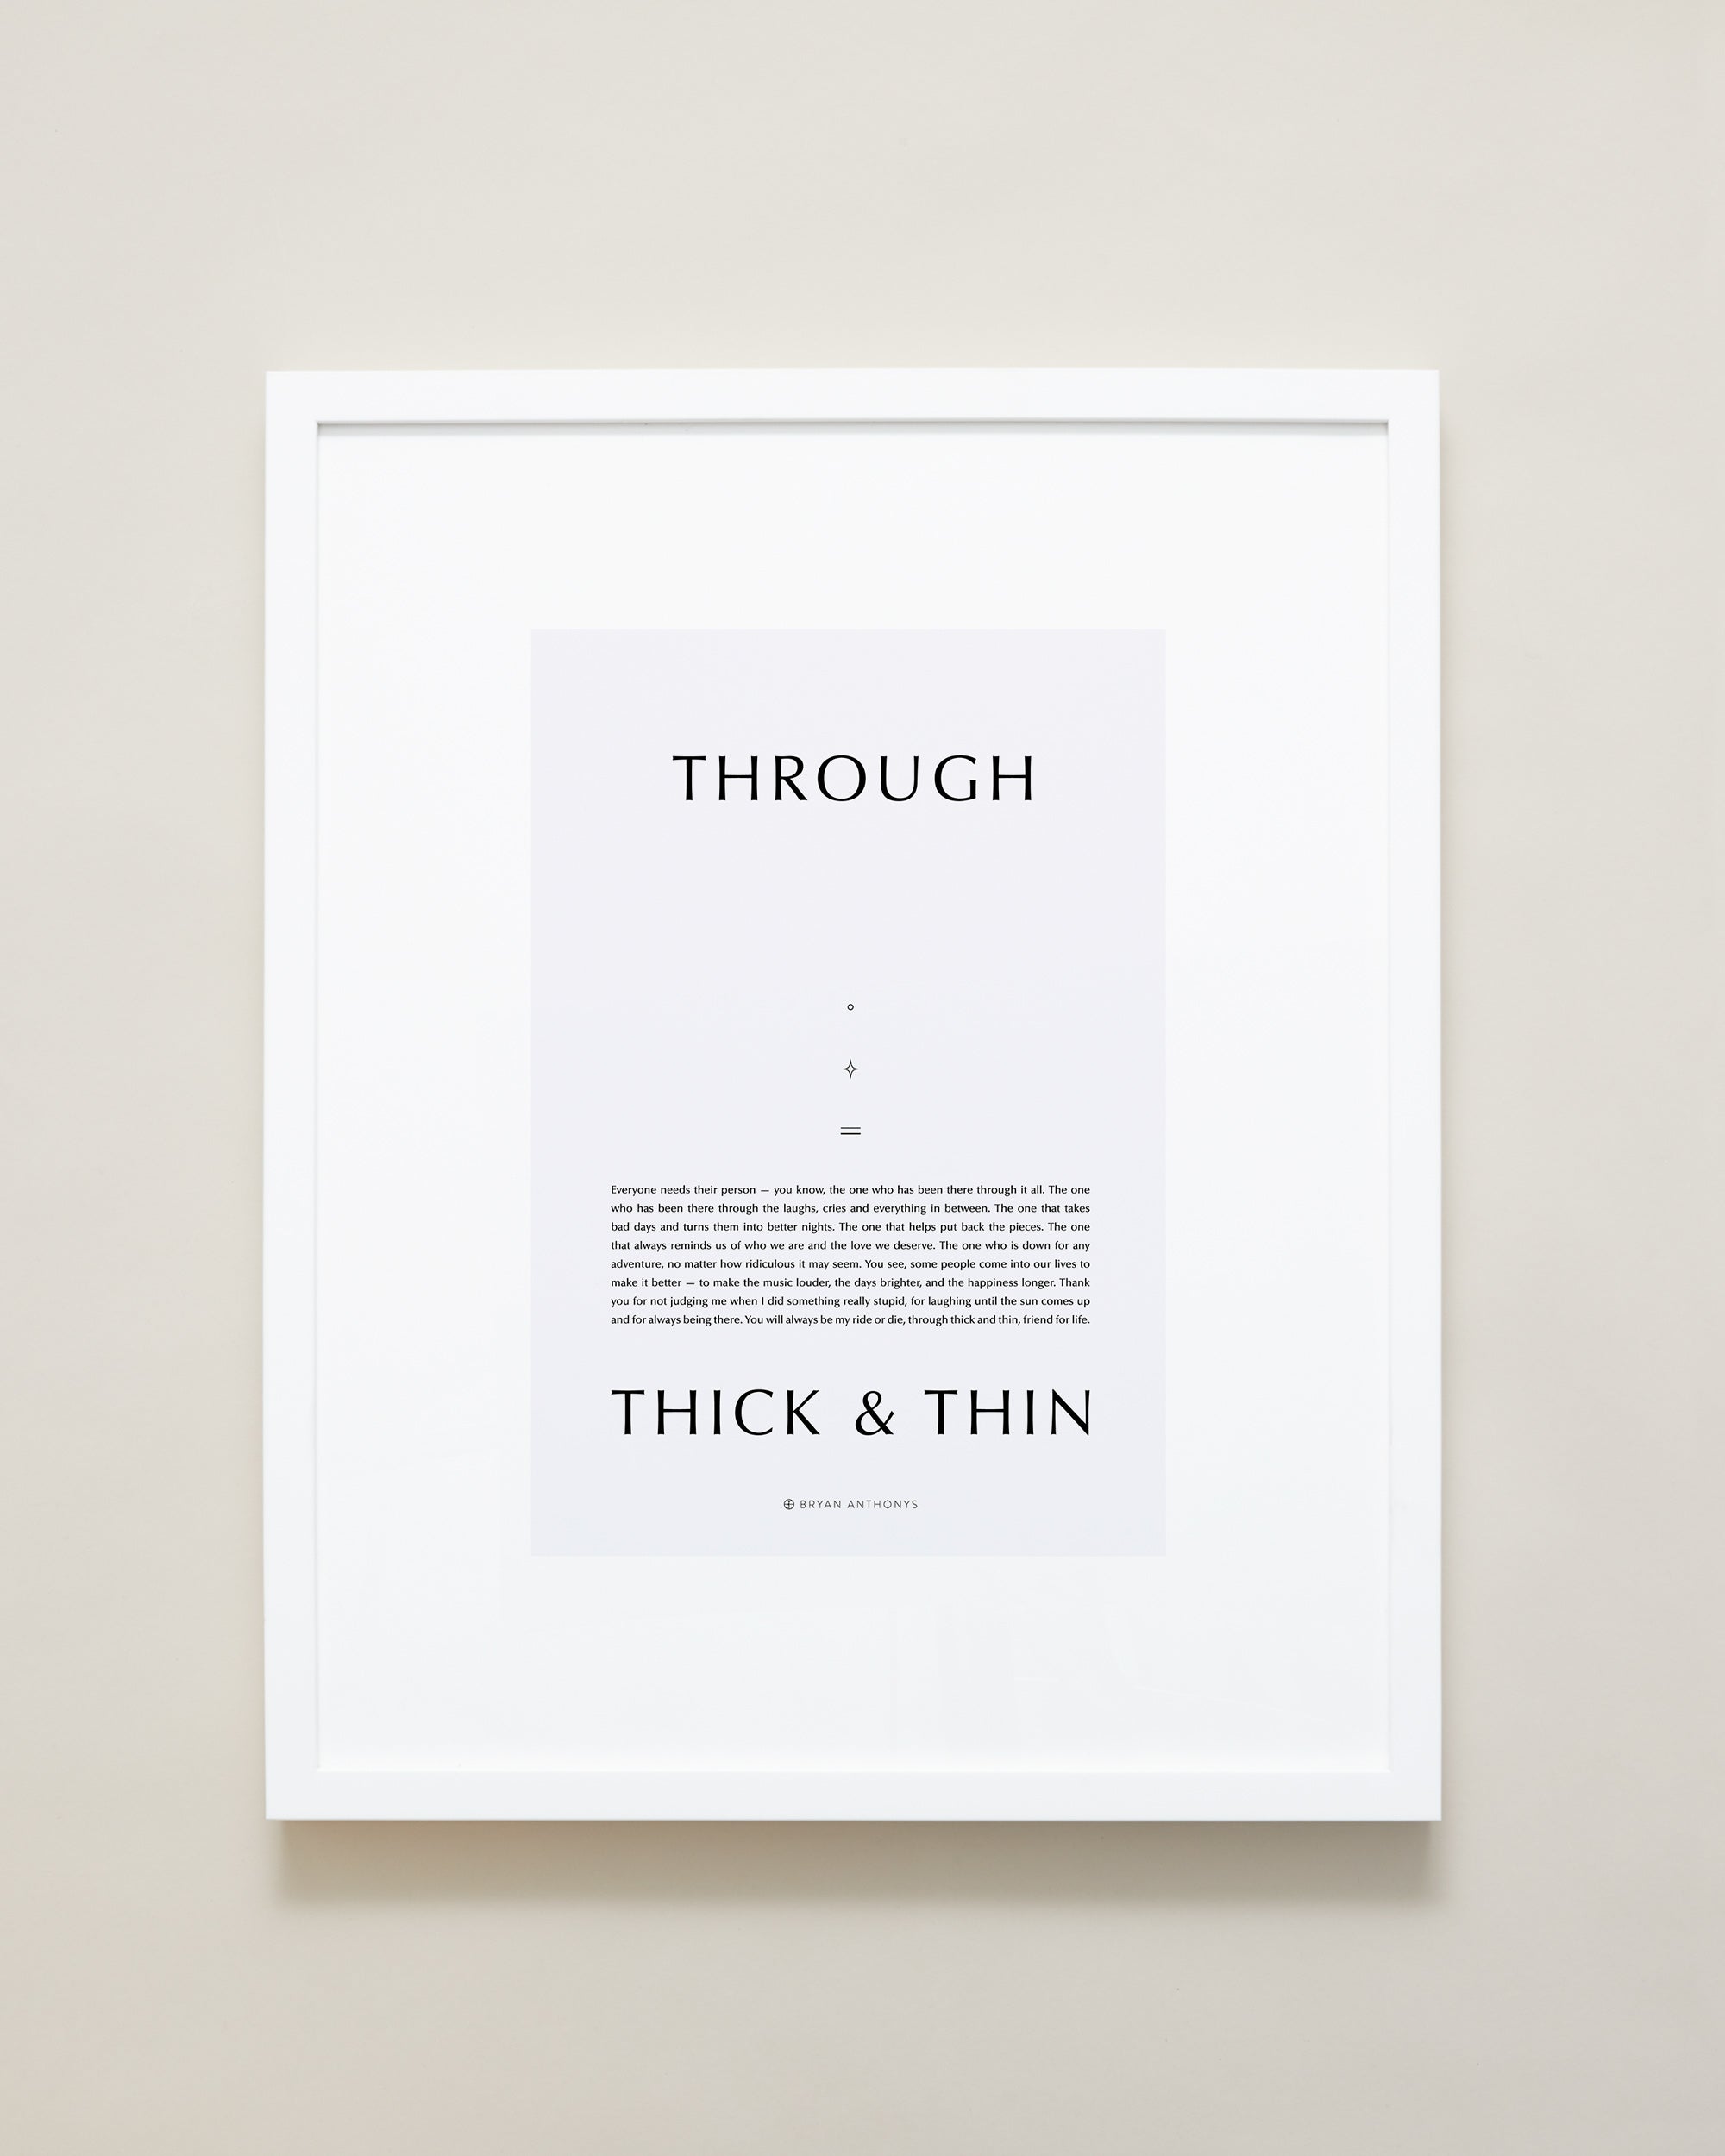 Bryan Anthonys Home Decor Through Thick and Thin Framed Print 16x20 White with Gray